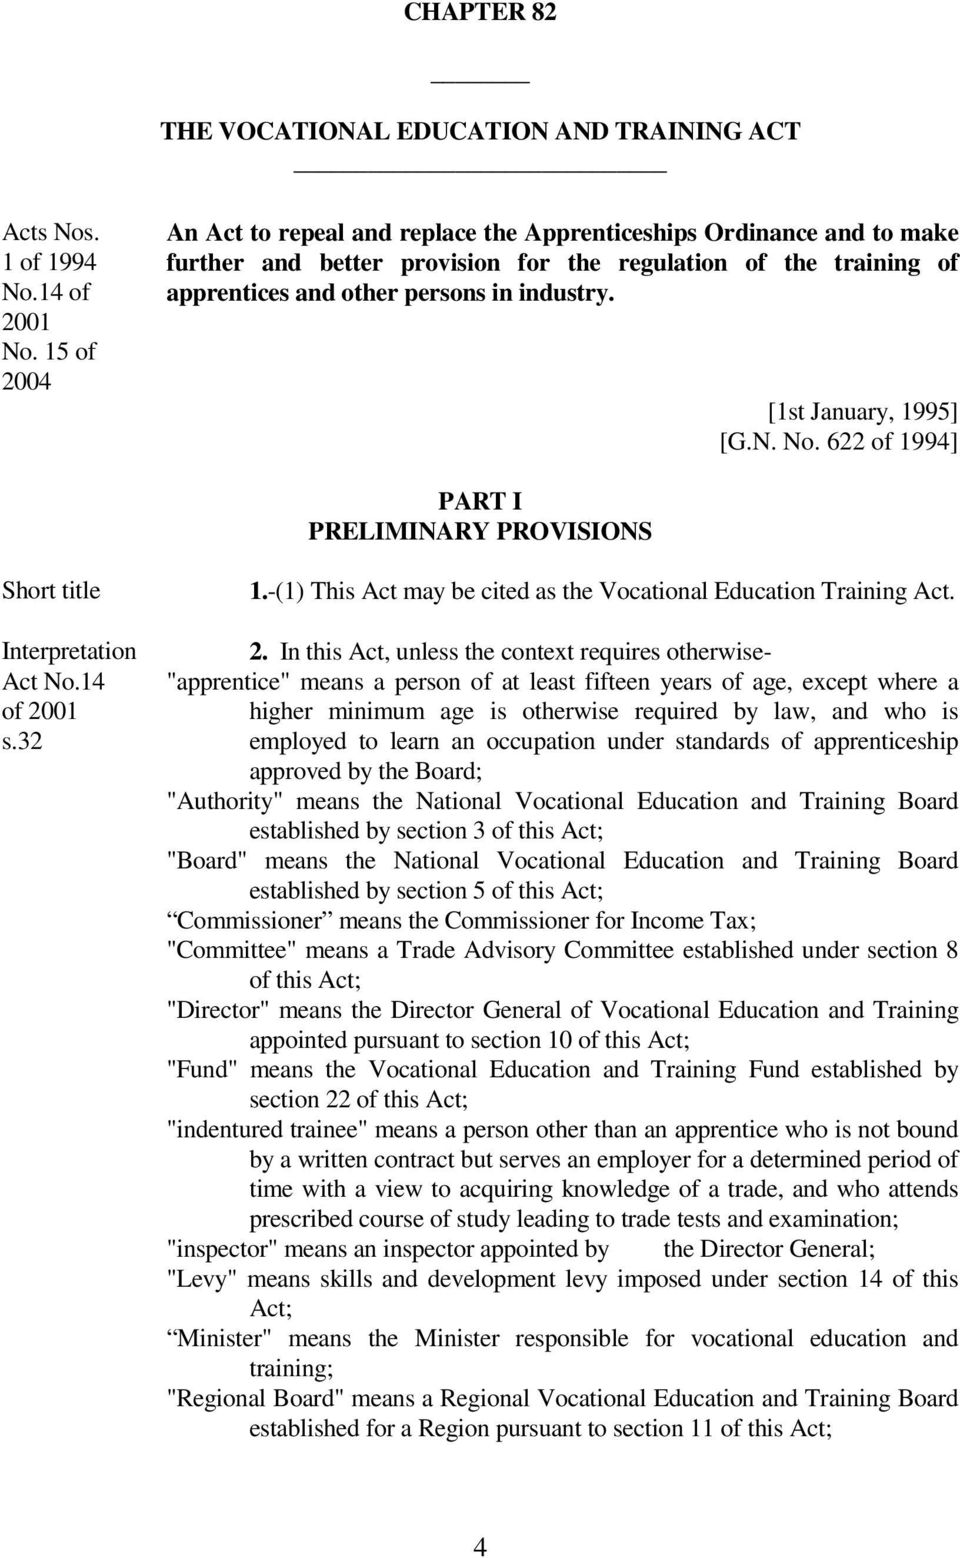 [1st January, 1995] [G.N. No. 622 of 1994] PART I PRELIMINARY PROVISIONS Short title Interpretation Act No.14 s.32 1.-(1) This Act may be cited as the Vocational Education Training Act. 2.